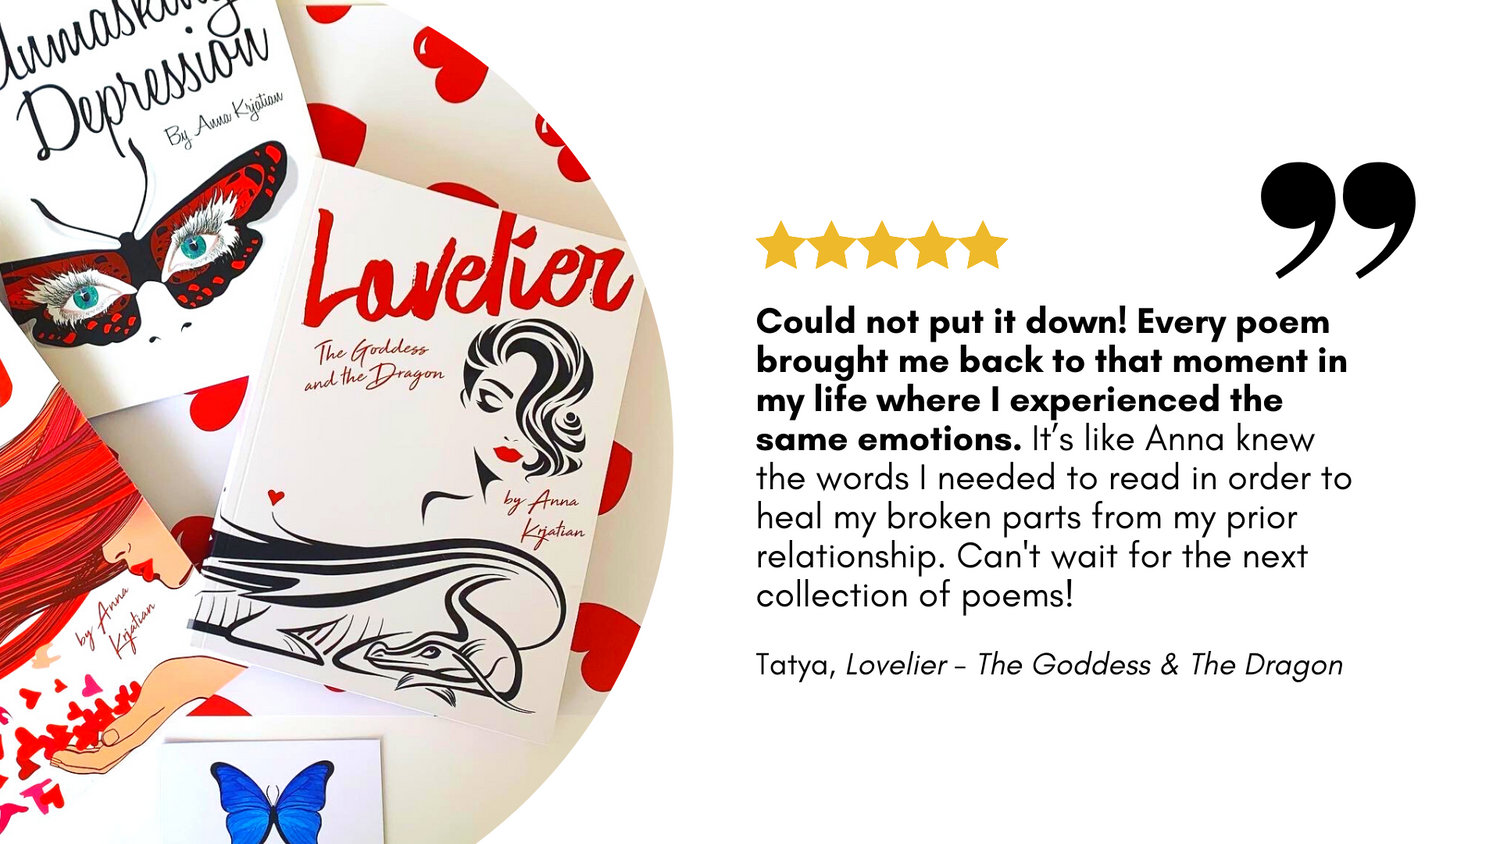 5 star book review from Tatya for "Lovelier  - The Goddess and The Dragon" reads: "Could not put it down! Every poem brought me back to that moment in my life where I experienced the same emotions. It’s like Anna knew the words I needed to read to heal." 